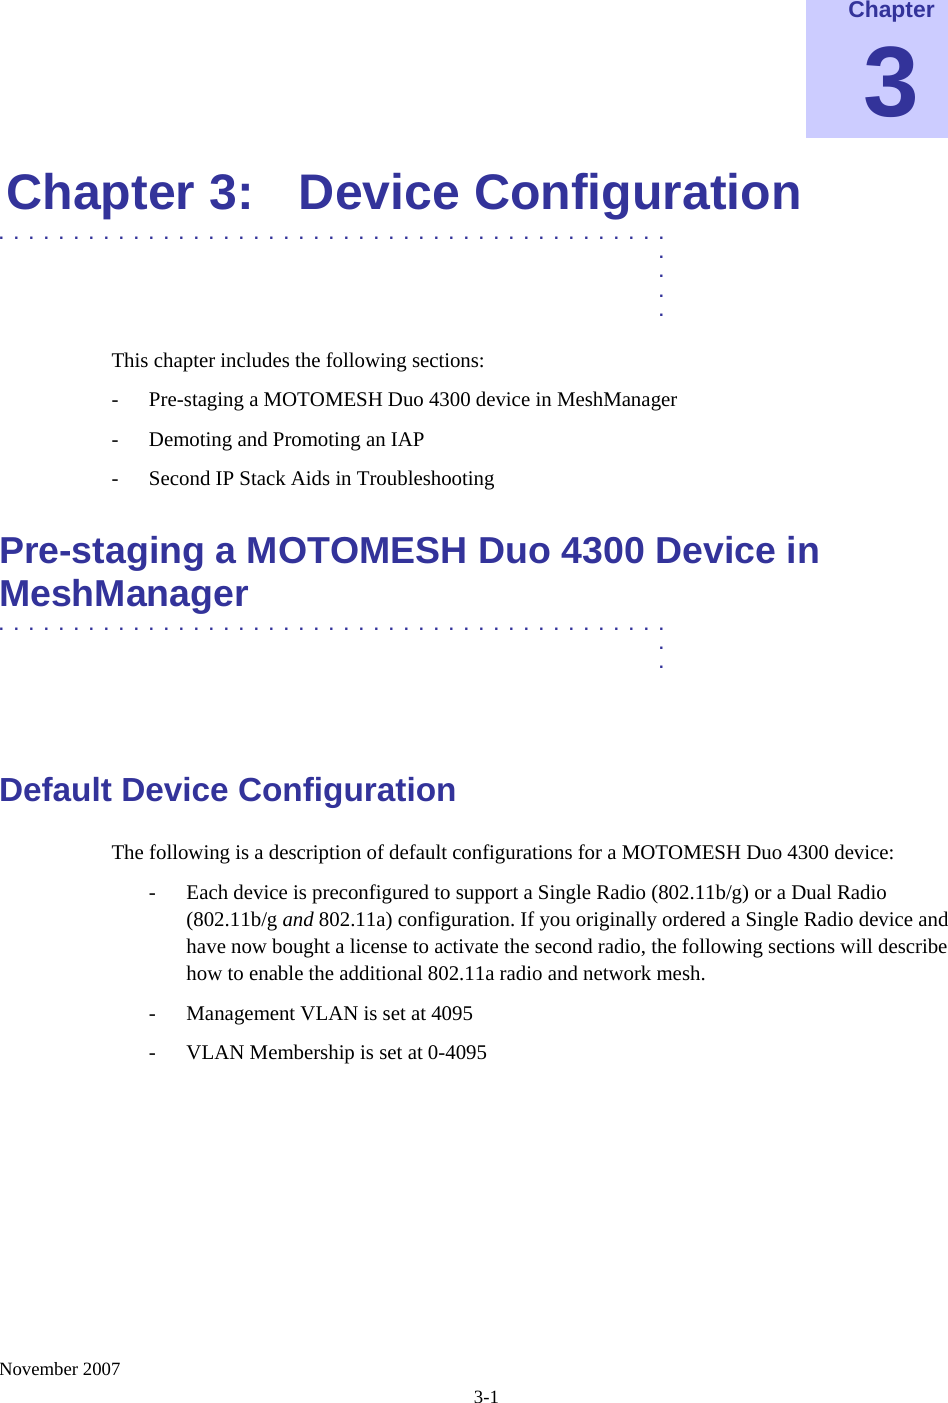    November 2007 3-1 Chapter 3 Chapter 3:  Device Configuration .............................................  .  .  .  . This chapter includes the following sections: - Pre-staging a MOTOMESH Duo 4300 device in MeshManager - Demoting and Promoting an IAP - Second IP Stack Aids in Troubleshooting Pre-staging a MOTOMESH Duo 4300 Device in MeshManager  .............................................  .  .  Default Device Configuration The following is a description of default configurations for a MOTOMESH Duo 4300 device: - Each device is preconfigured to support a Single Radio (802.11b/g) or a Dual Radio (802.11b/g and 802.11a) configuration. If you originally ordered a Single Radio device and have now bought a license to activate the second radio, the following sections will describe how to enable the additional 802.11a radio and network mesh. - Management VLAN is set at 4095 - VLAN Membership is set at 0-4095 